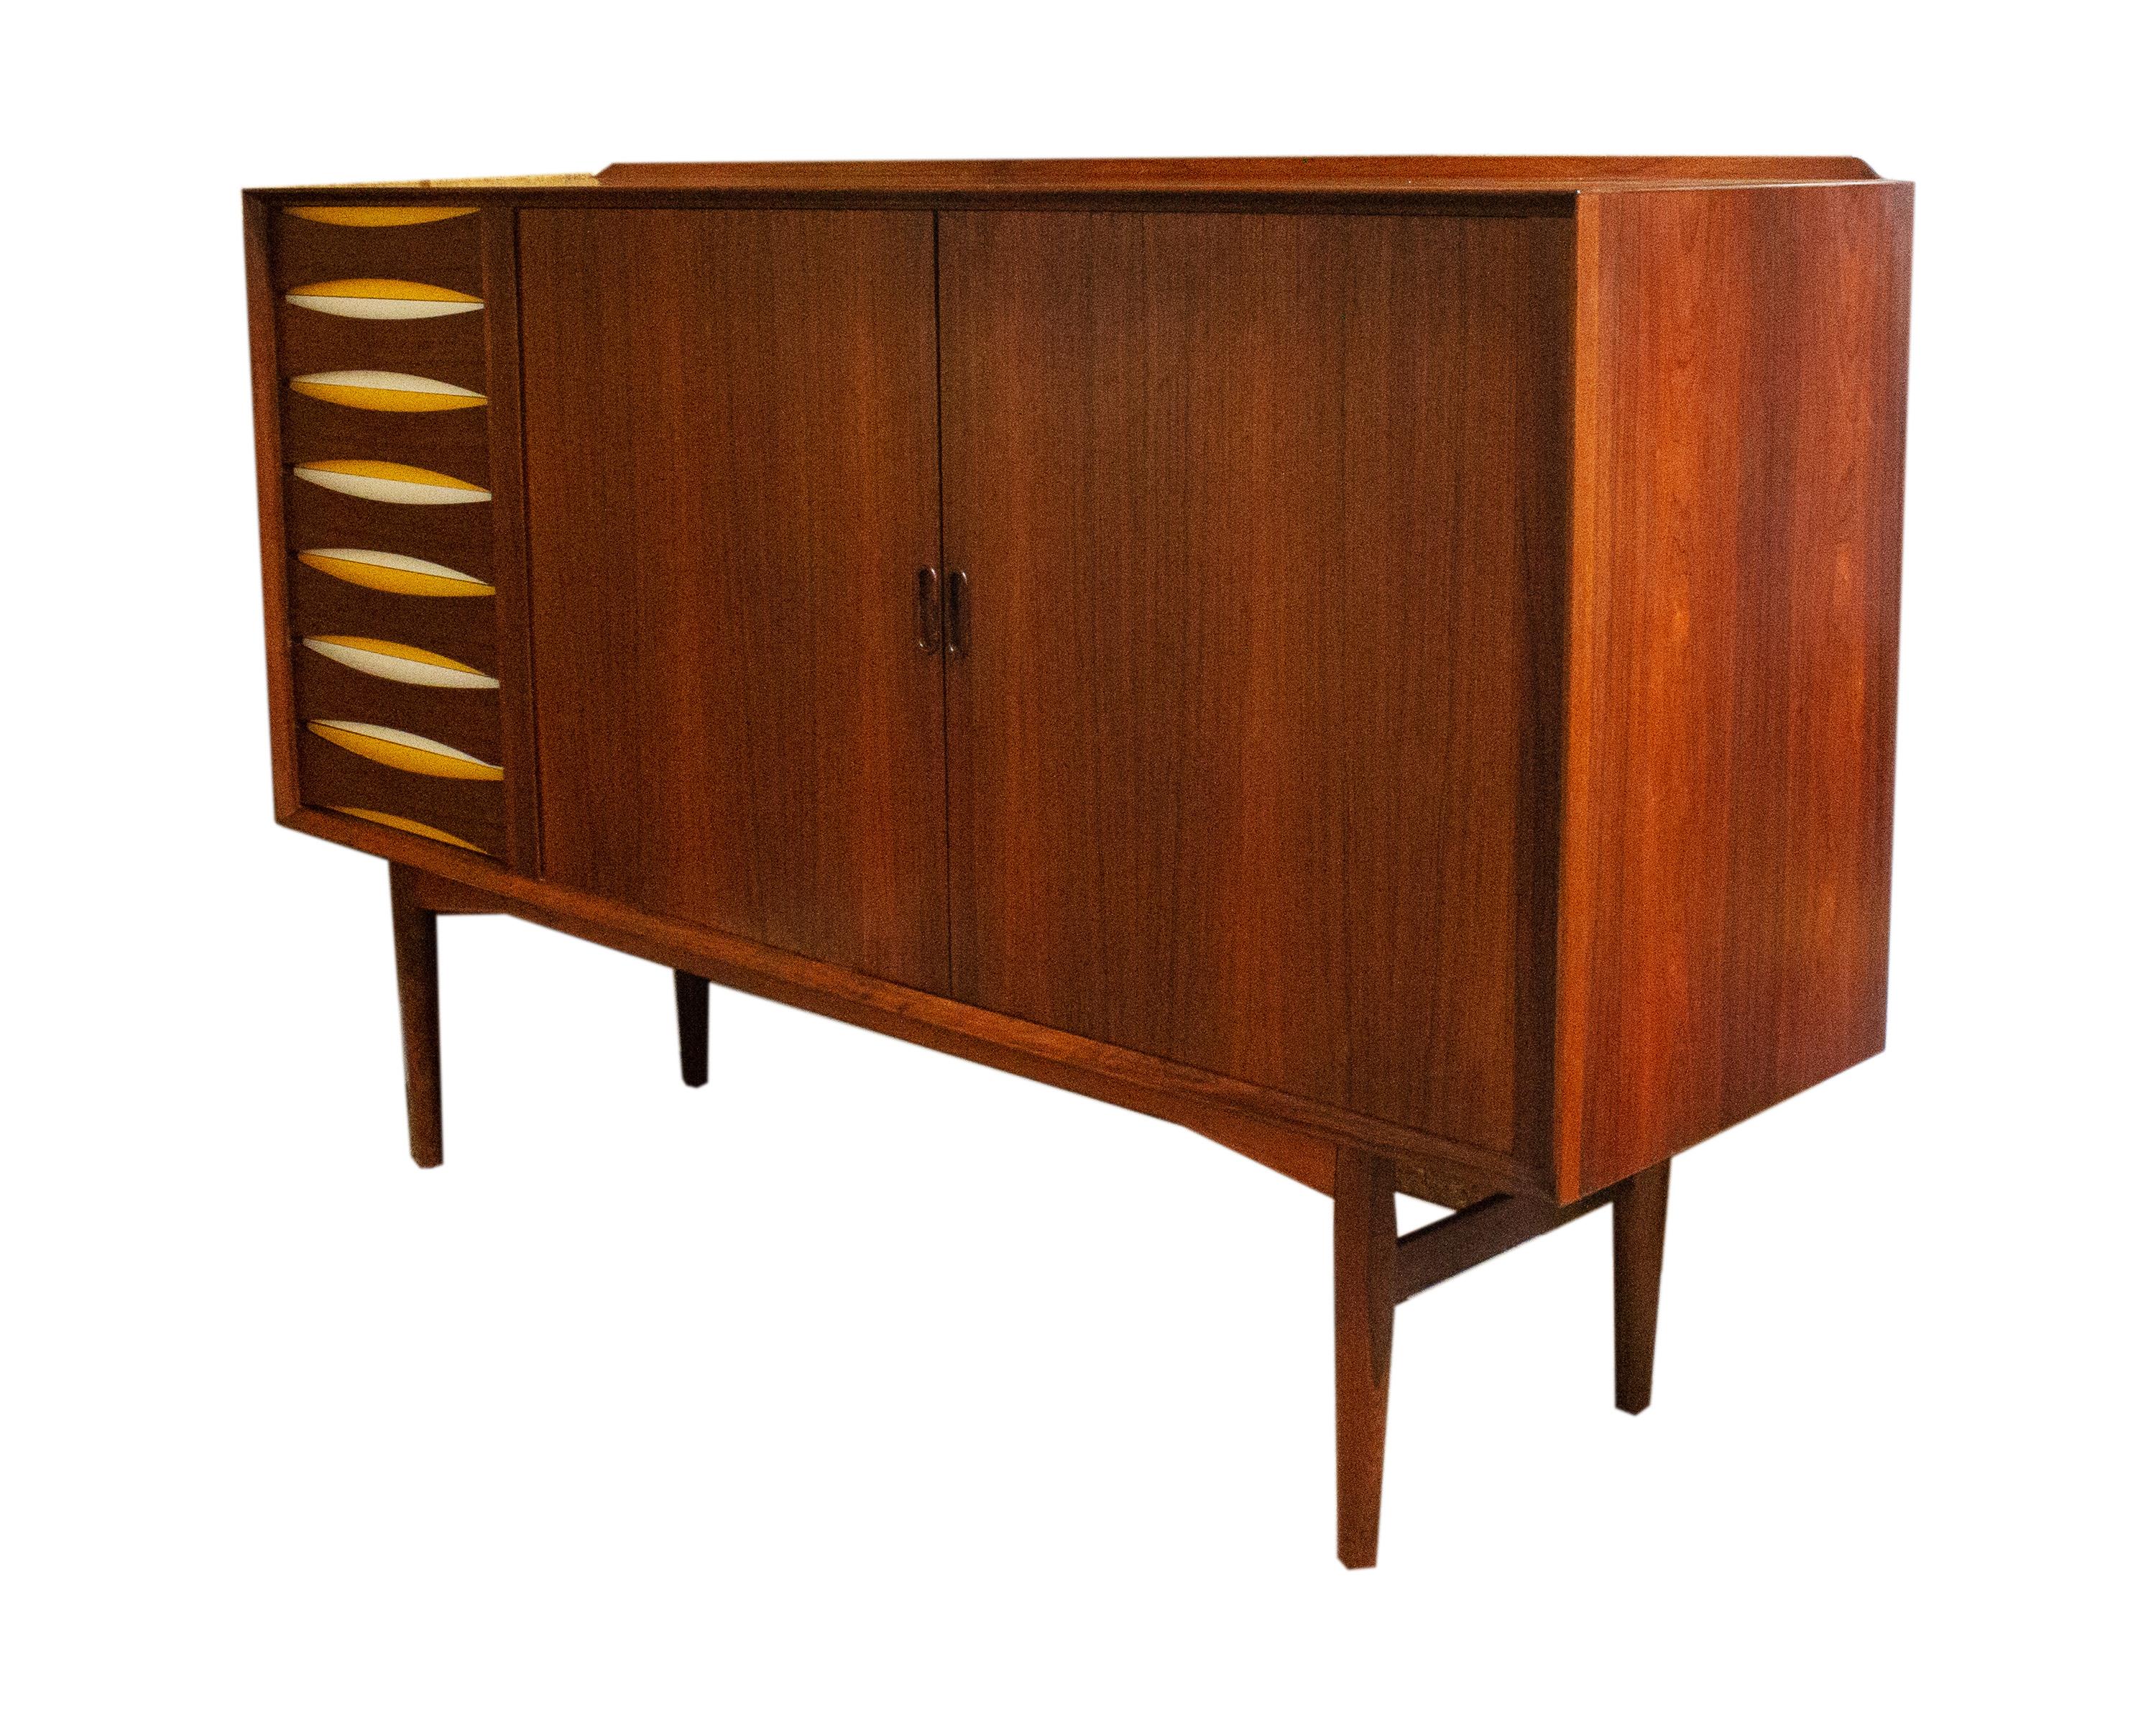 A rosewood cabinet designed by the Danish designer Arne Vodder (1926-2009) for Sibast Møbler. Made in Denmark, this tall cabinet features tamboured doors on the right and seven drawers on the left. Each drawer has a bowtie-shaped wooden front framed